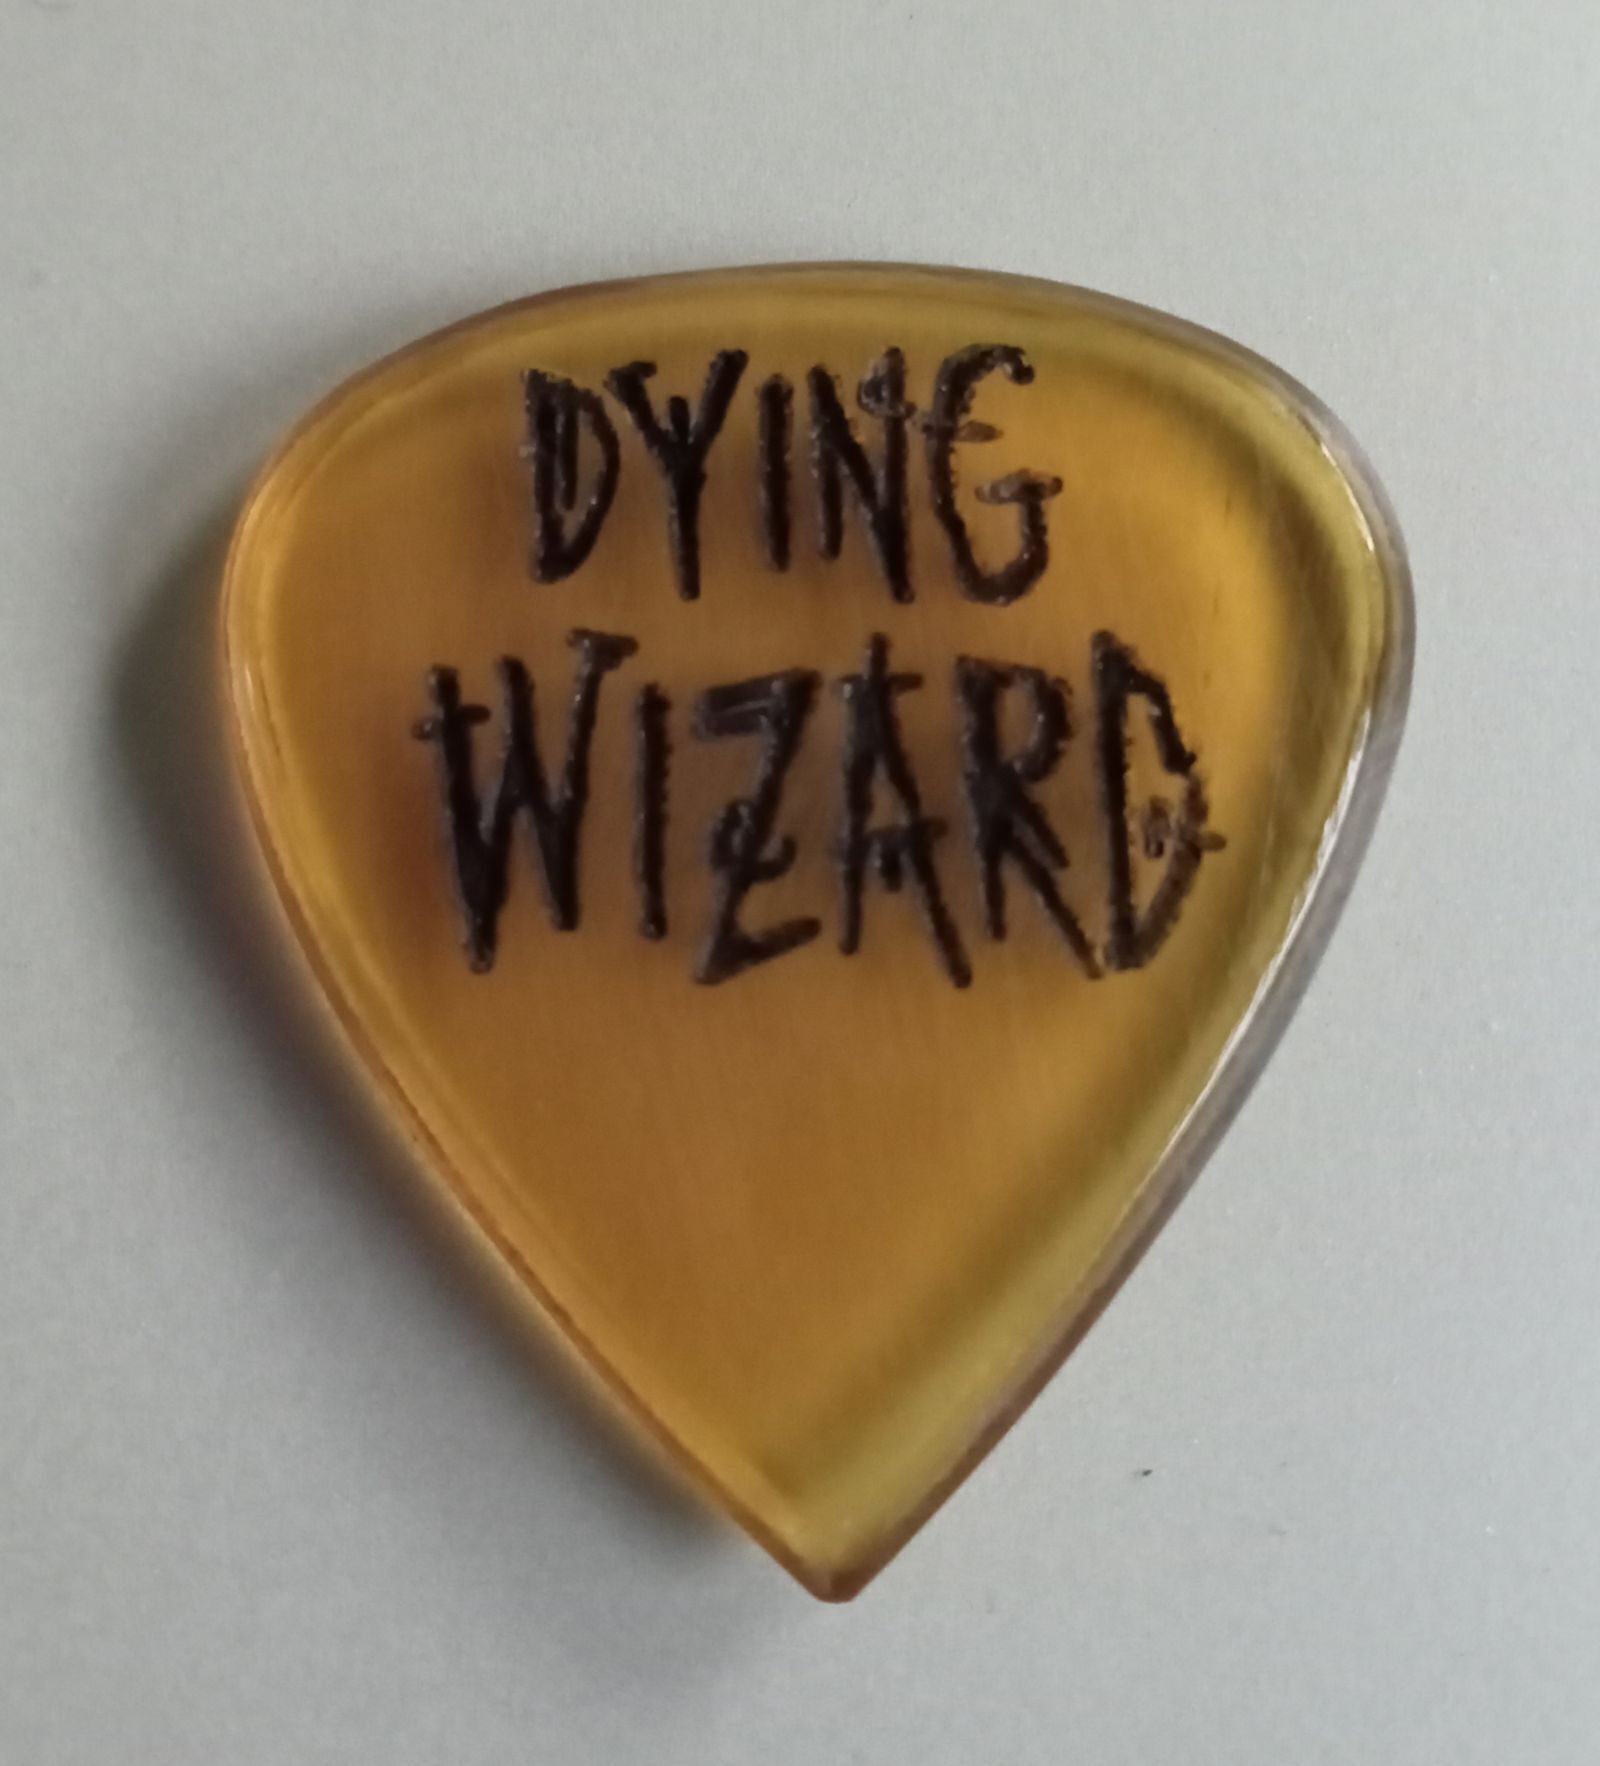 Dying Wizard